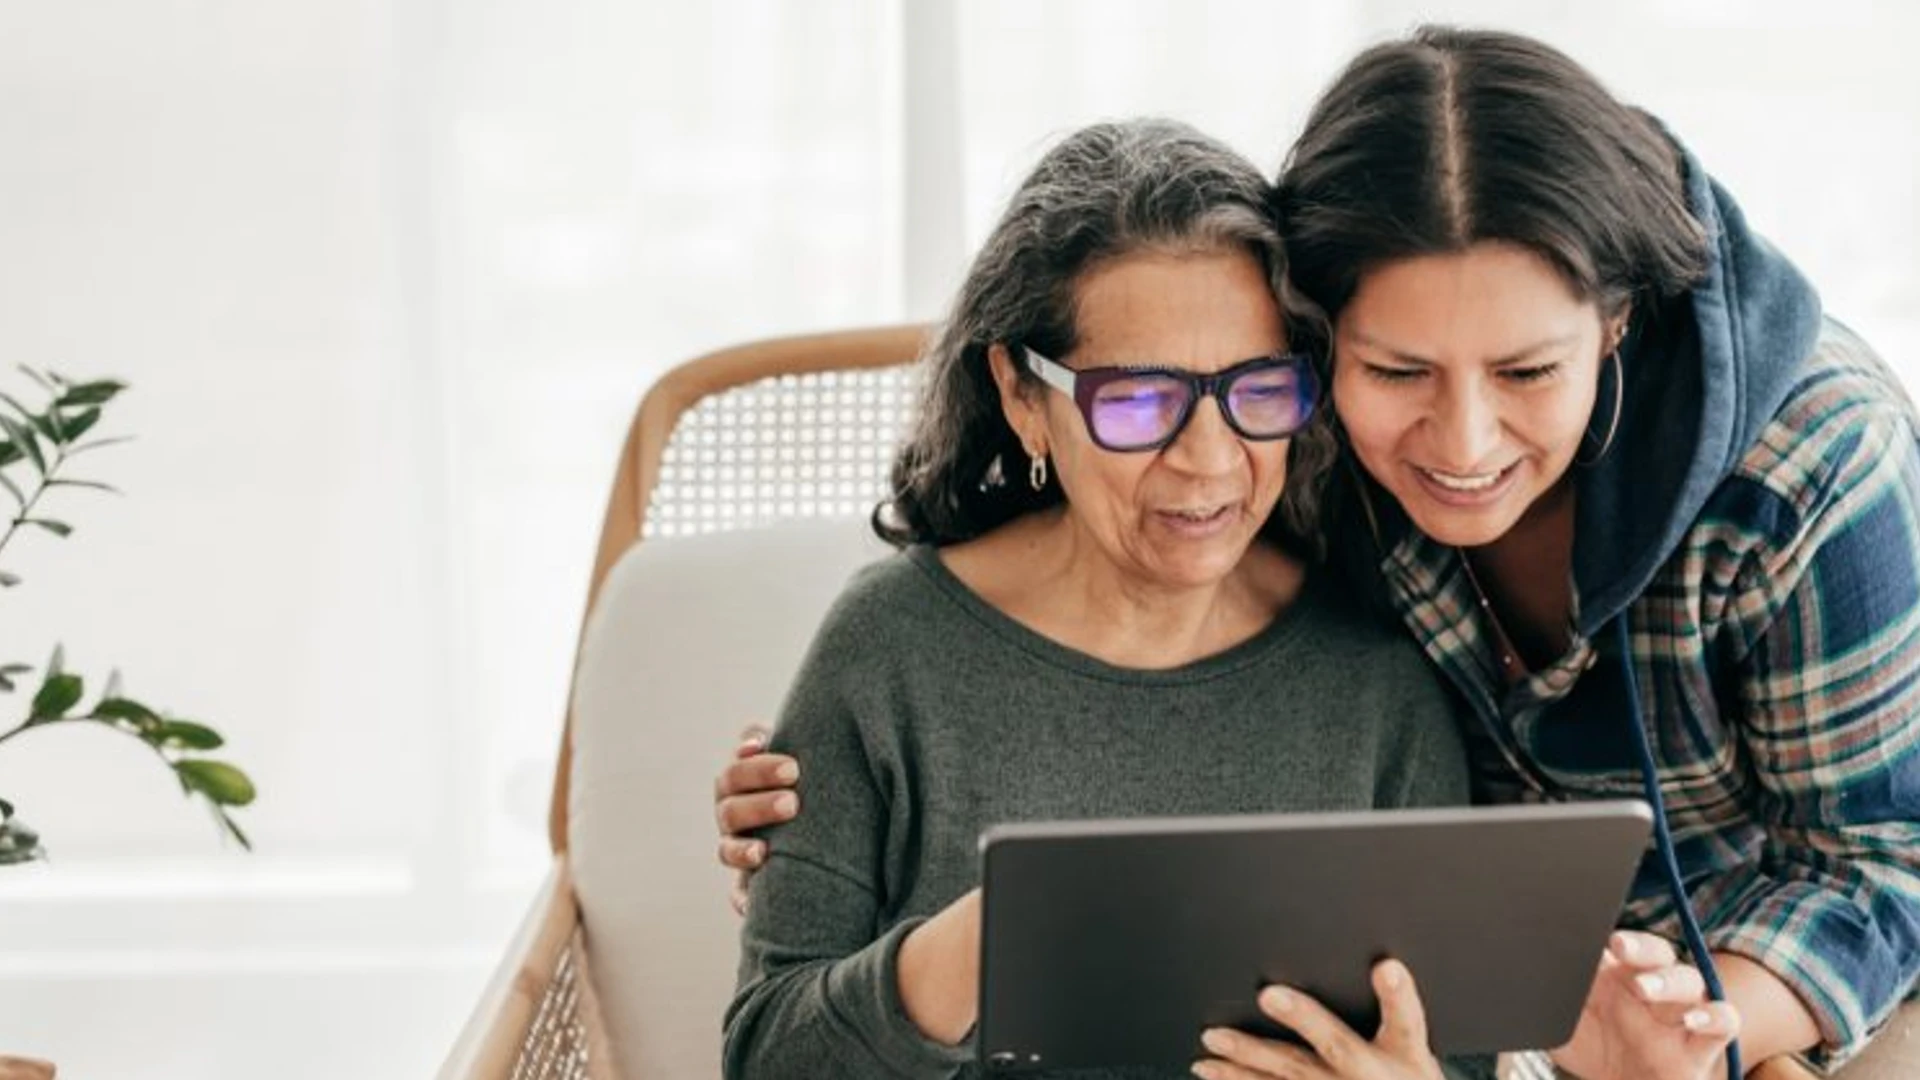 Don’t Be a Victim: 8 Tips for Keeping Aging Parents Safe Online